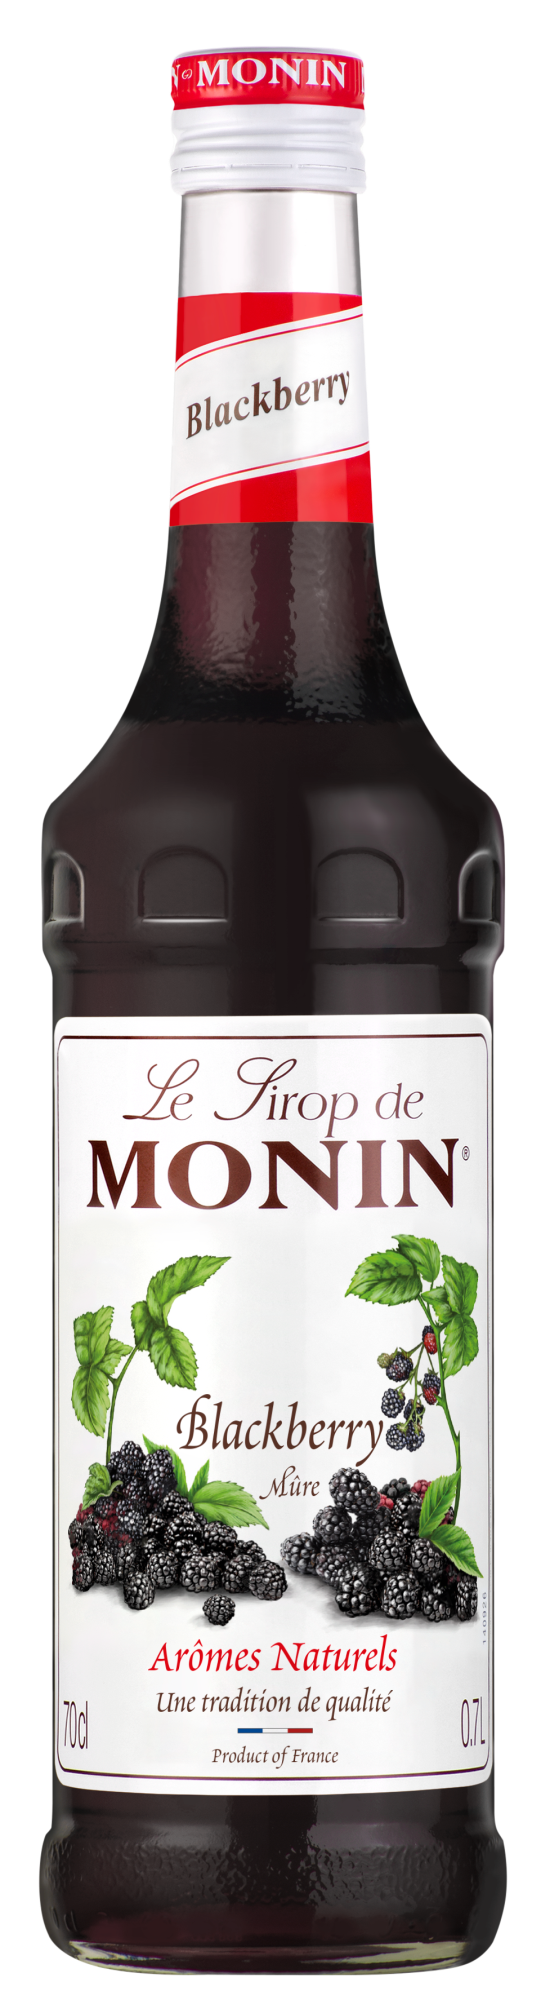 Buy MONIN Blackberry syrup. This syrup is ideal in lemonades, iced teas, frappes, cocktails and mocktails.